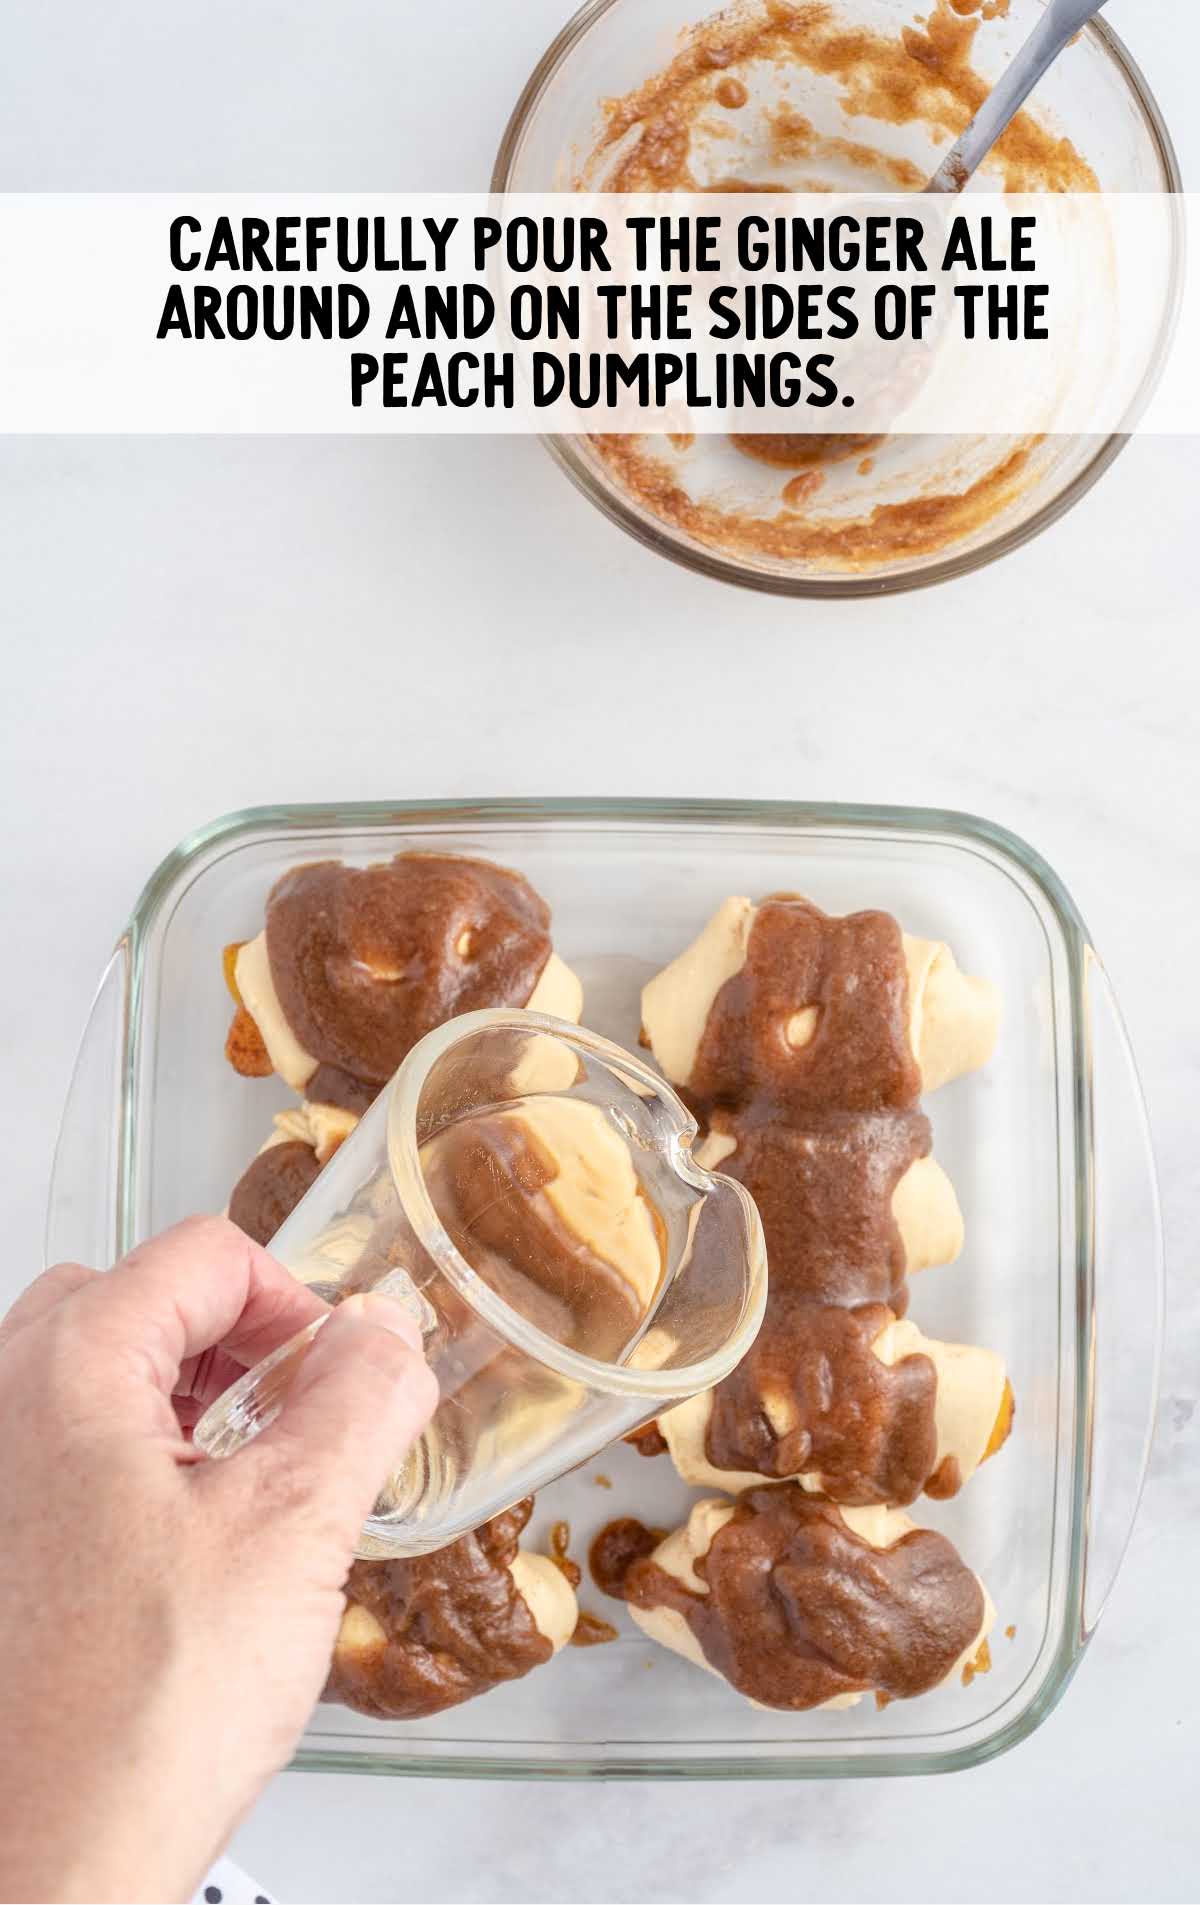 ginger ale poured around and on the sides of the peach dumplings in a baking dish